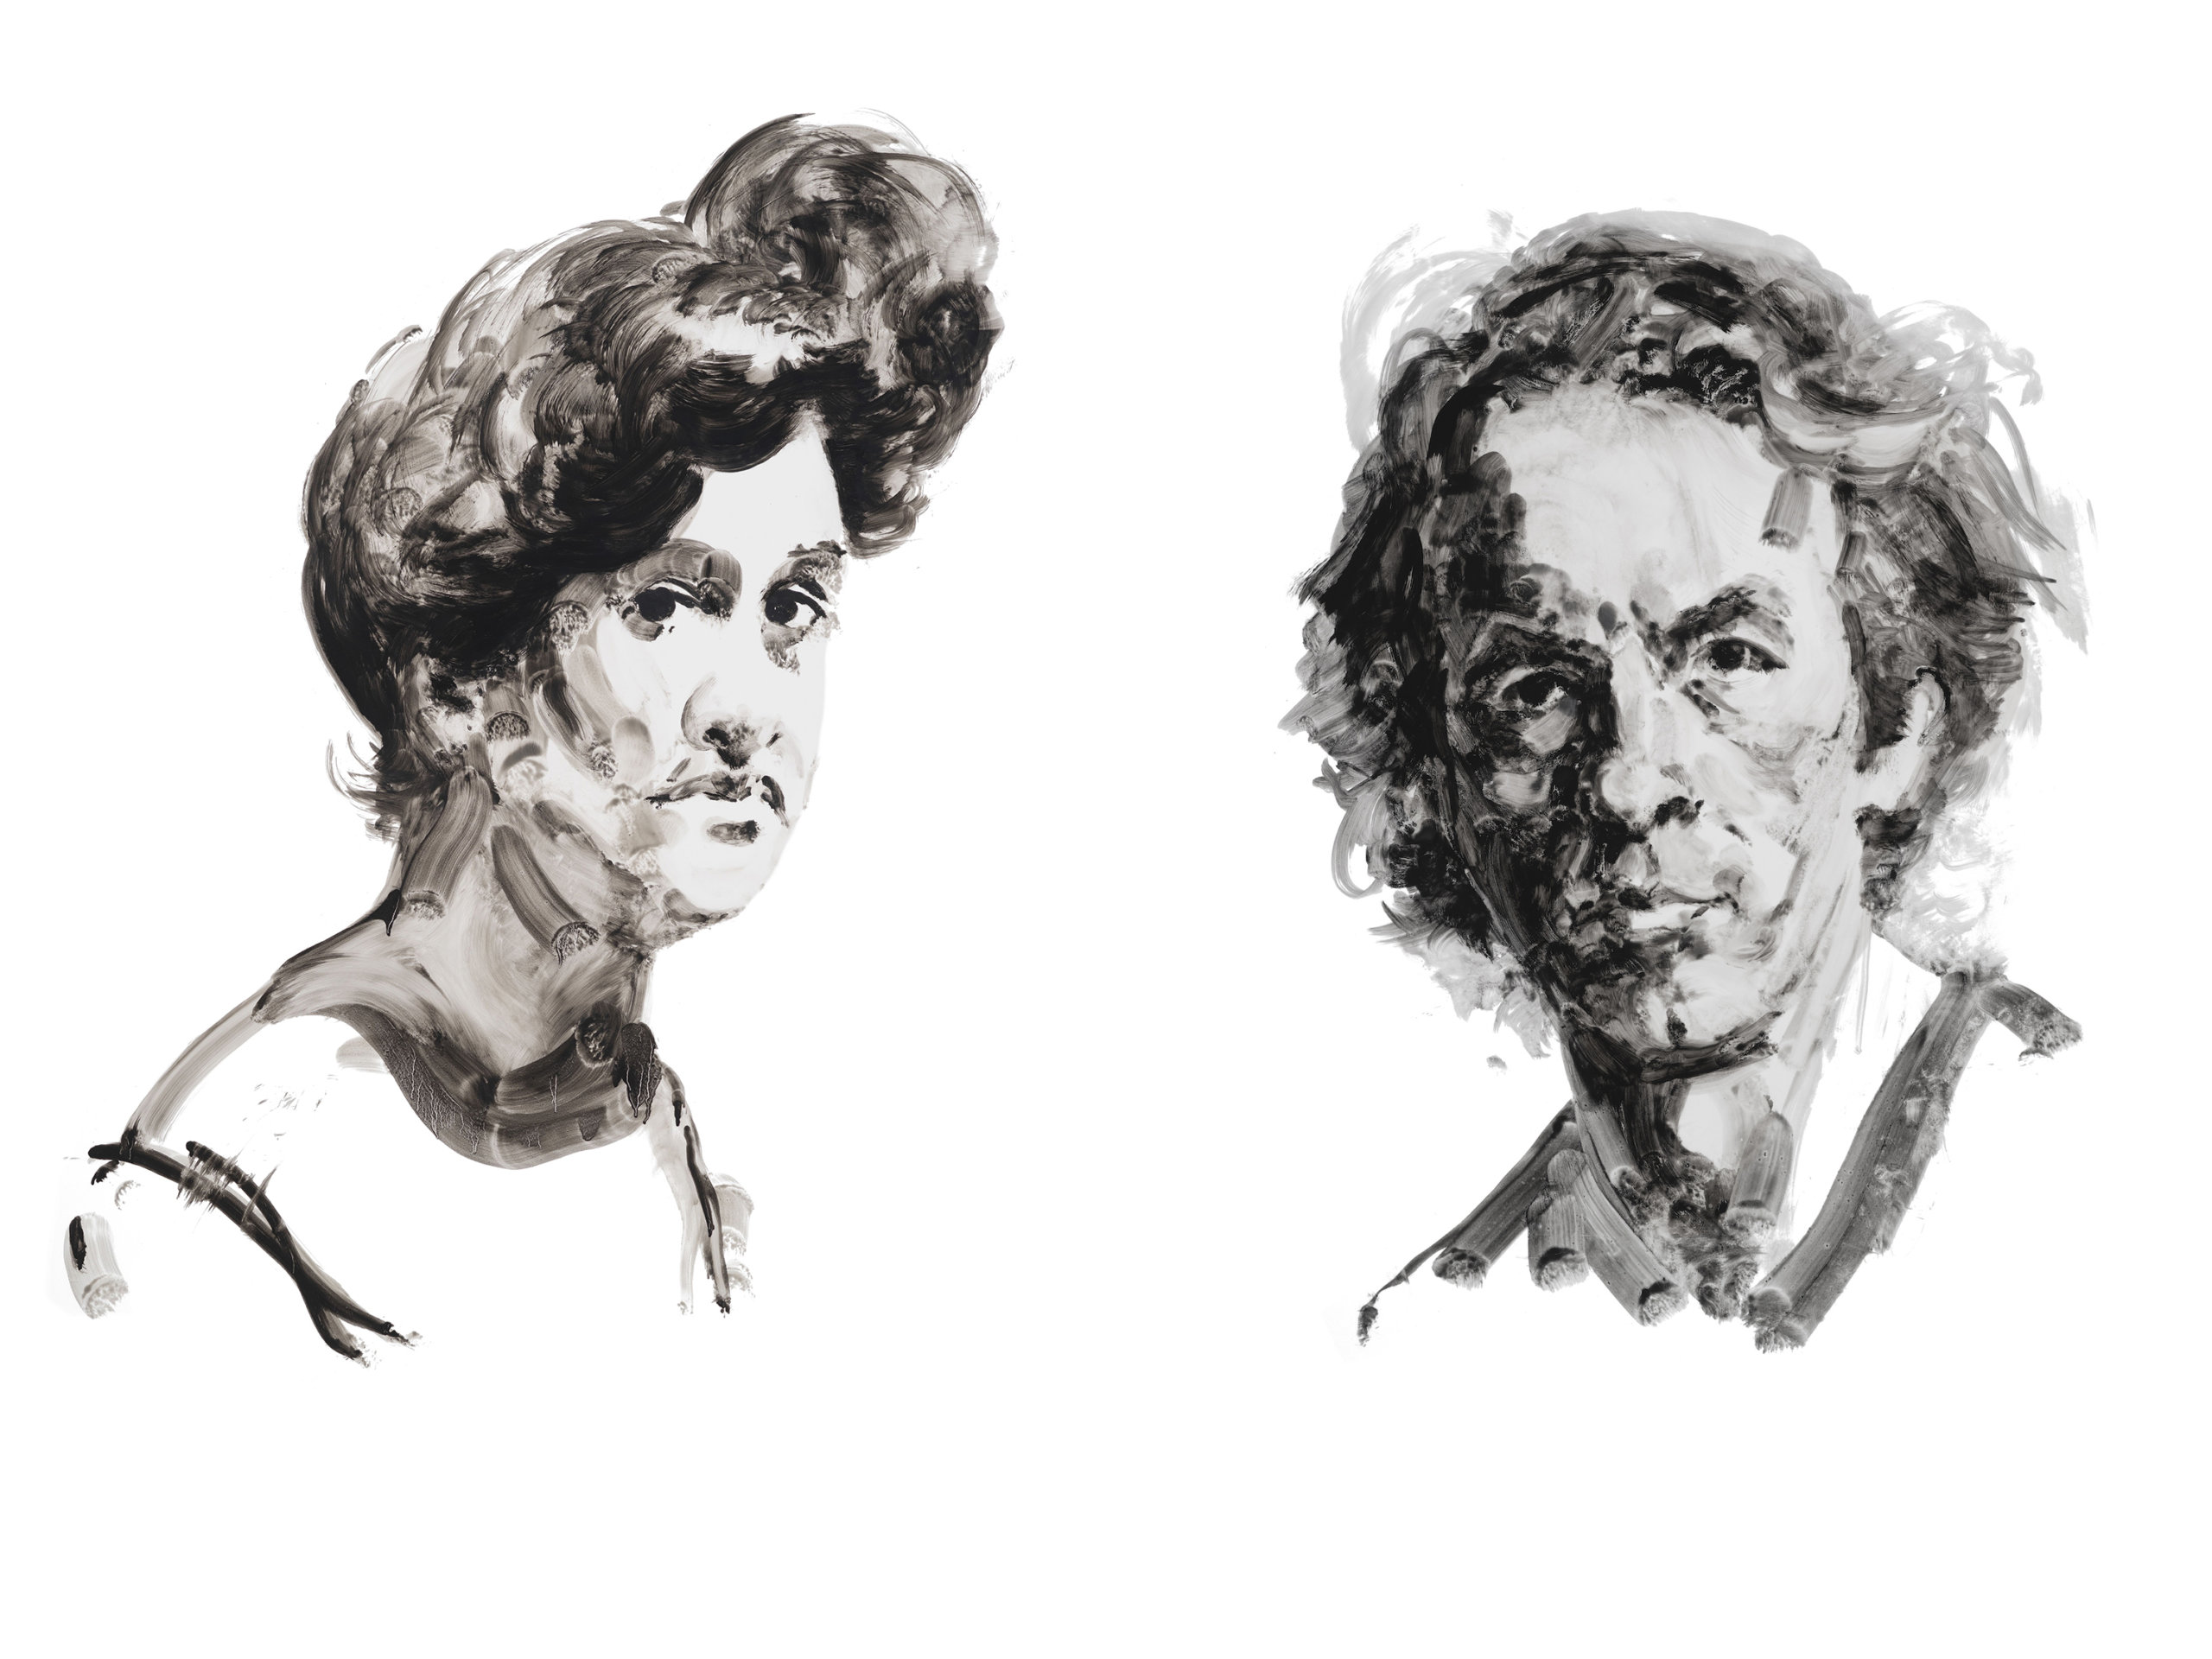 Daisy Tapley and Spalding Gray as depicted by Eric Fischl